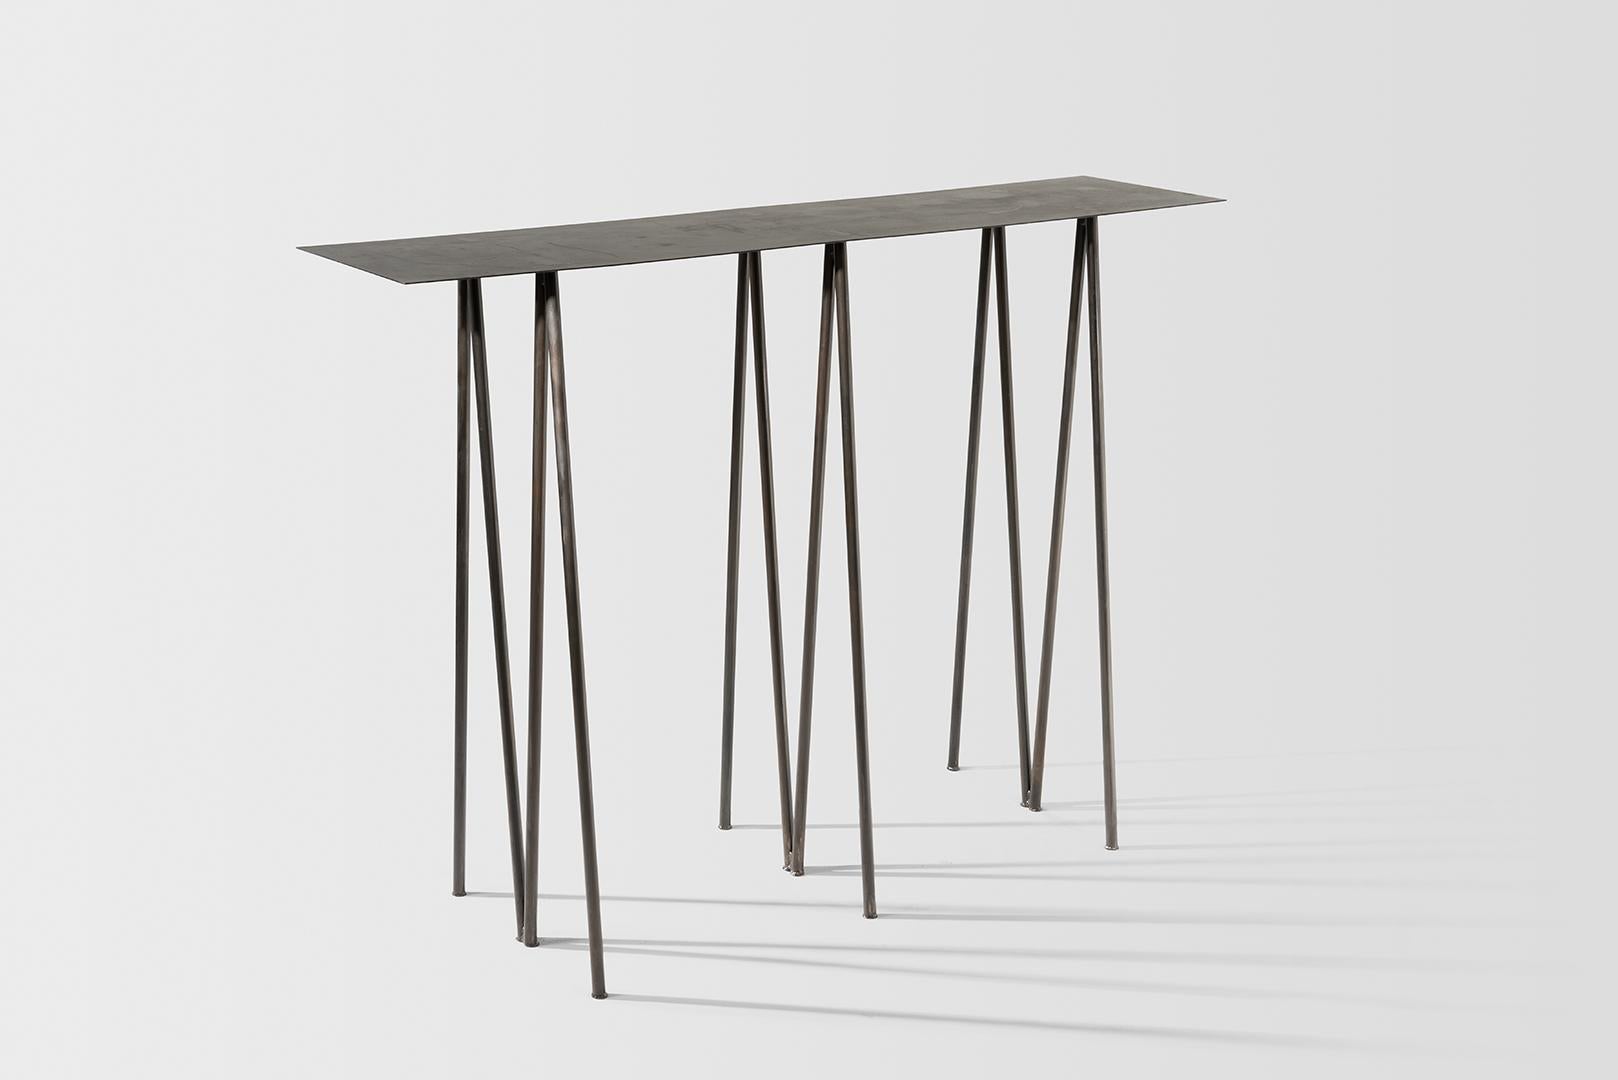 Where metal implies sturdiness, and calls for strong industrial motifs - the I/ the H, the beam / the cross, the Paper Table is a play on our own sense of balance. 

It questions the thinness of both surface and structure, in order to reach their